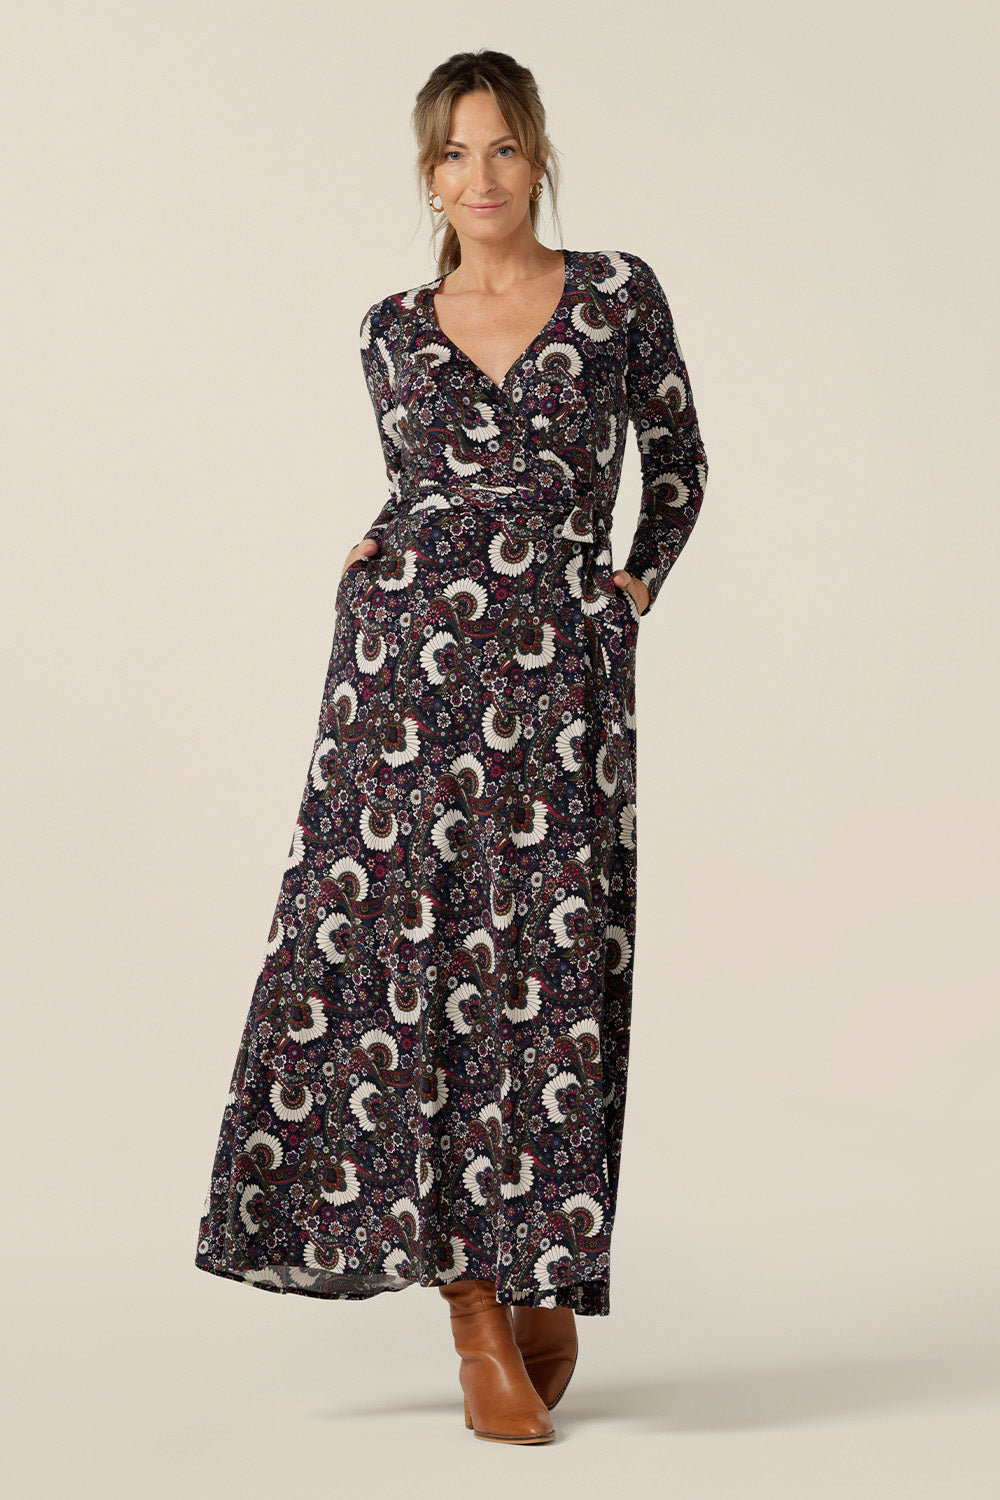 A great maxi dress for women looking for stylish 40 plus fashion, the Kimberley maxi dress has long sleeves, pockets and a V-neck. This full-length, wrap dress comes in paisley print jersey and is available to buy in sizes 8 to 24.